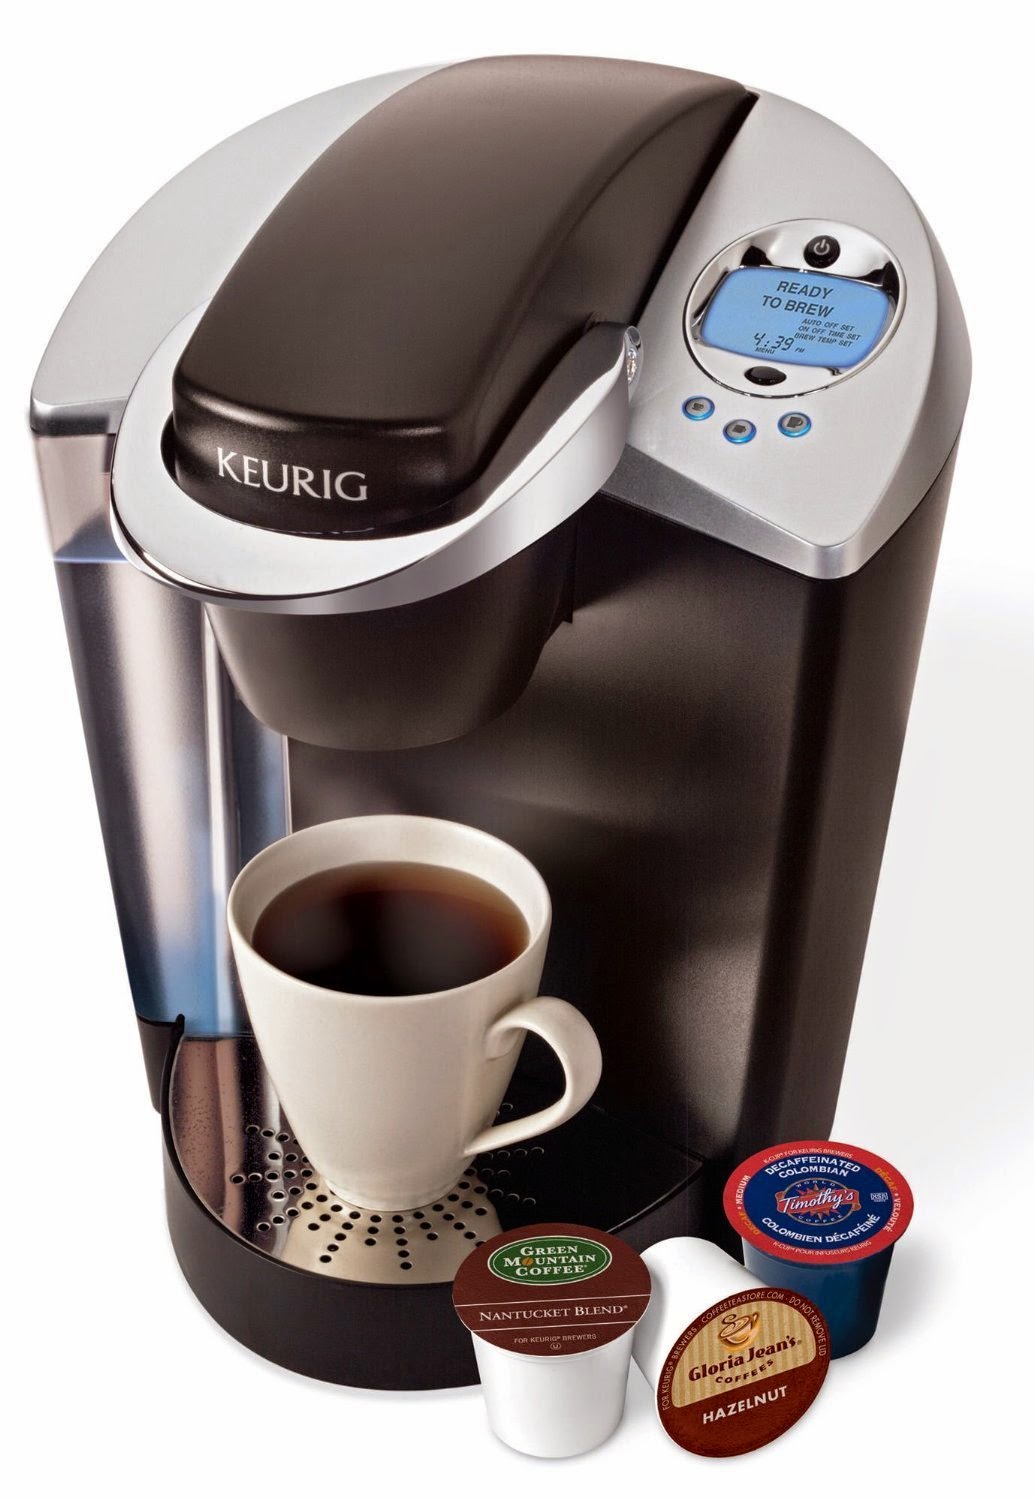 Keurig K-Cup K60/K65 Special Edition & Signature Brewers, brews coffee, tea, cocoa in just 1 minute, holds enough water for up to 8 cups, adjustable brew temperatures 187-192 degrees F, 3 brew size options